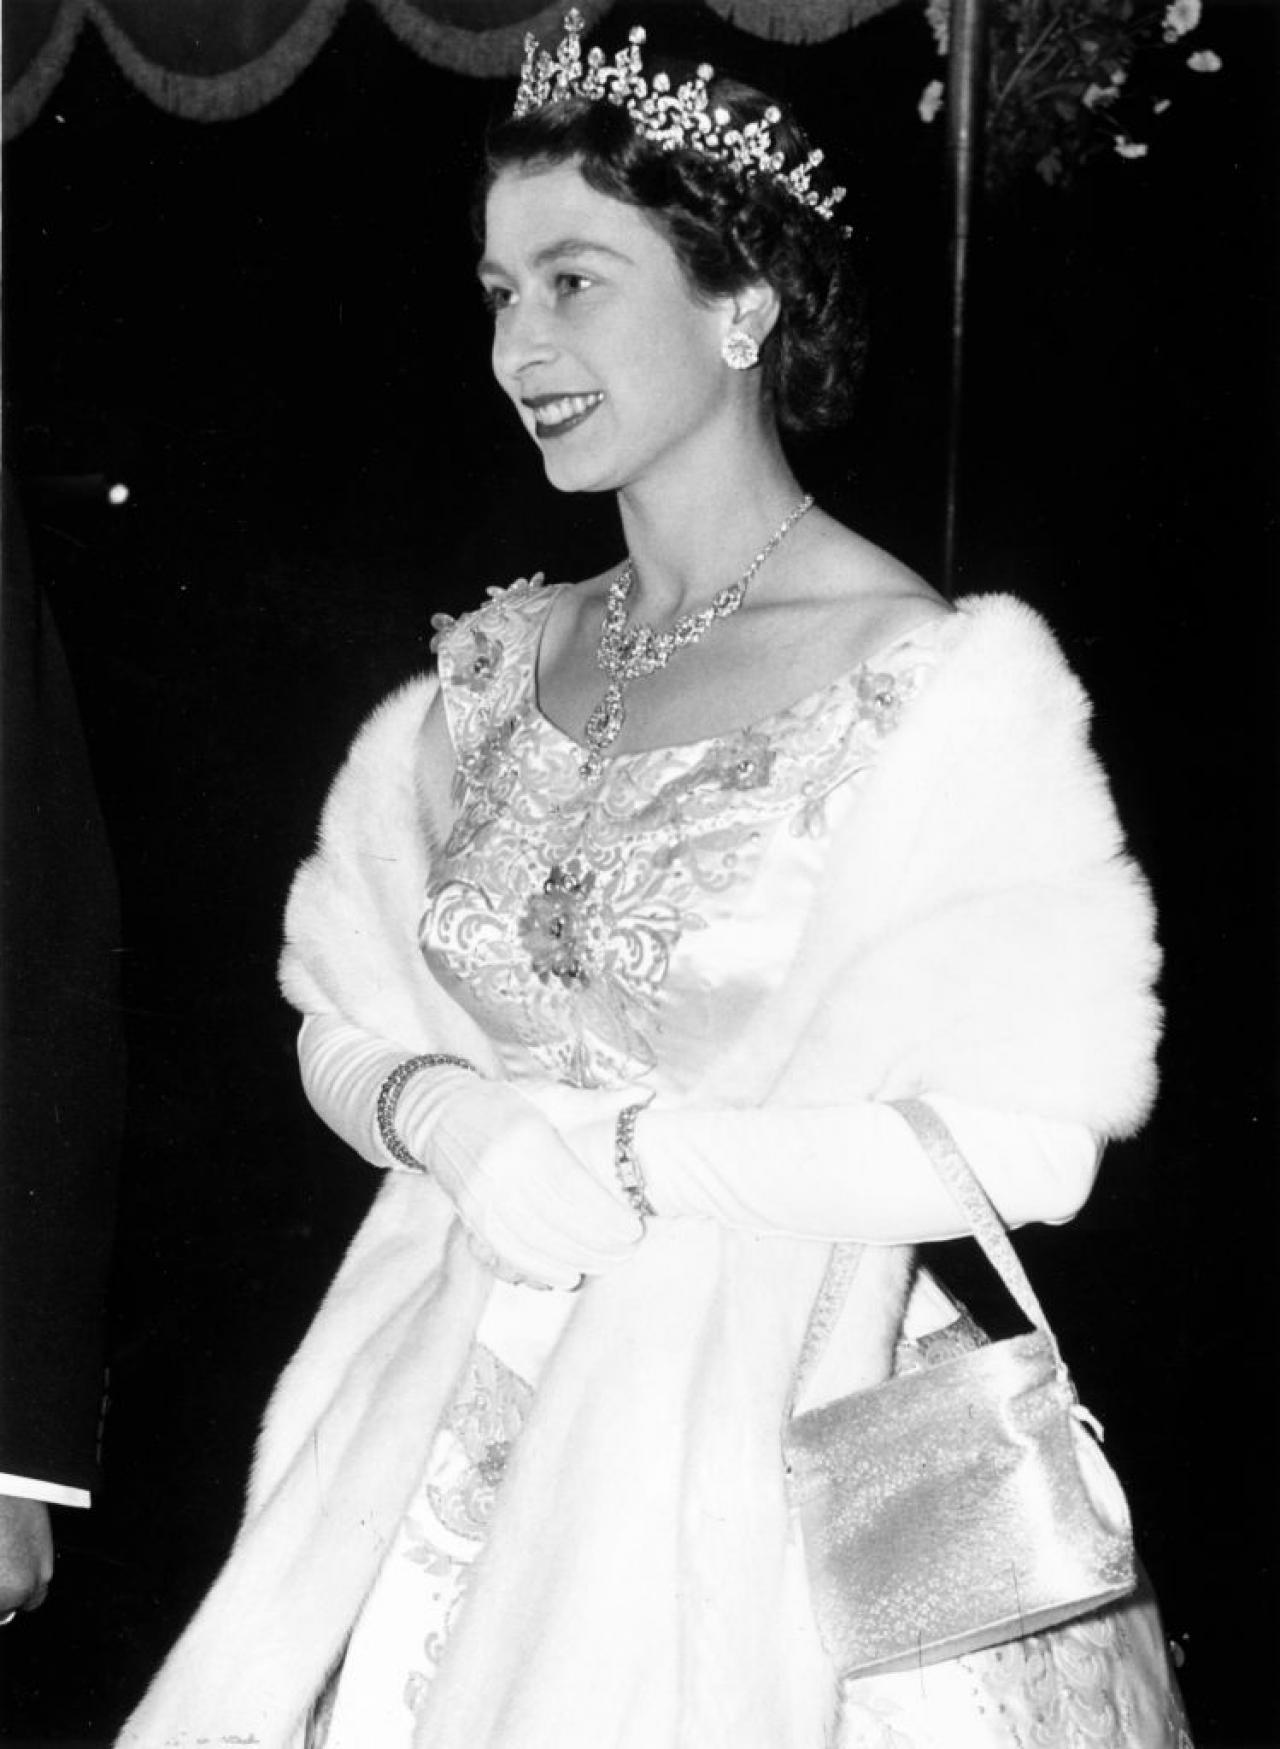 31st October 1955:  A regally adorned Queen Elizabeth II arriving at the Royal Performance of the film 'To Catch A Thief' at the Odeon Cinema, Leicester Square.  (Photo by Monty Fresco/Topical Press Agency/Getty Images)